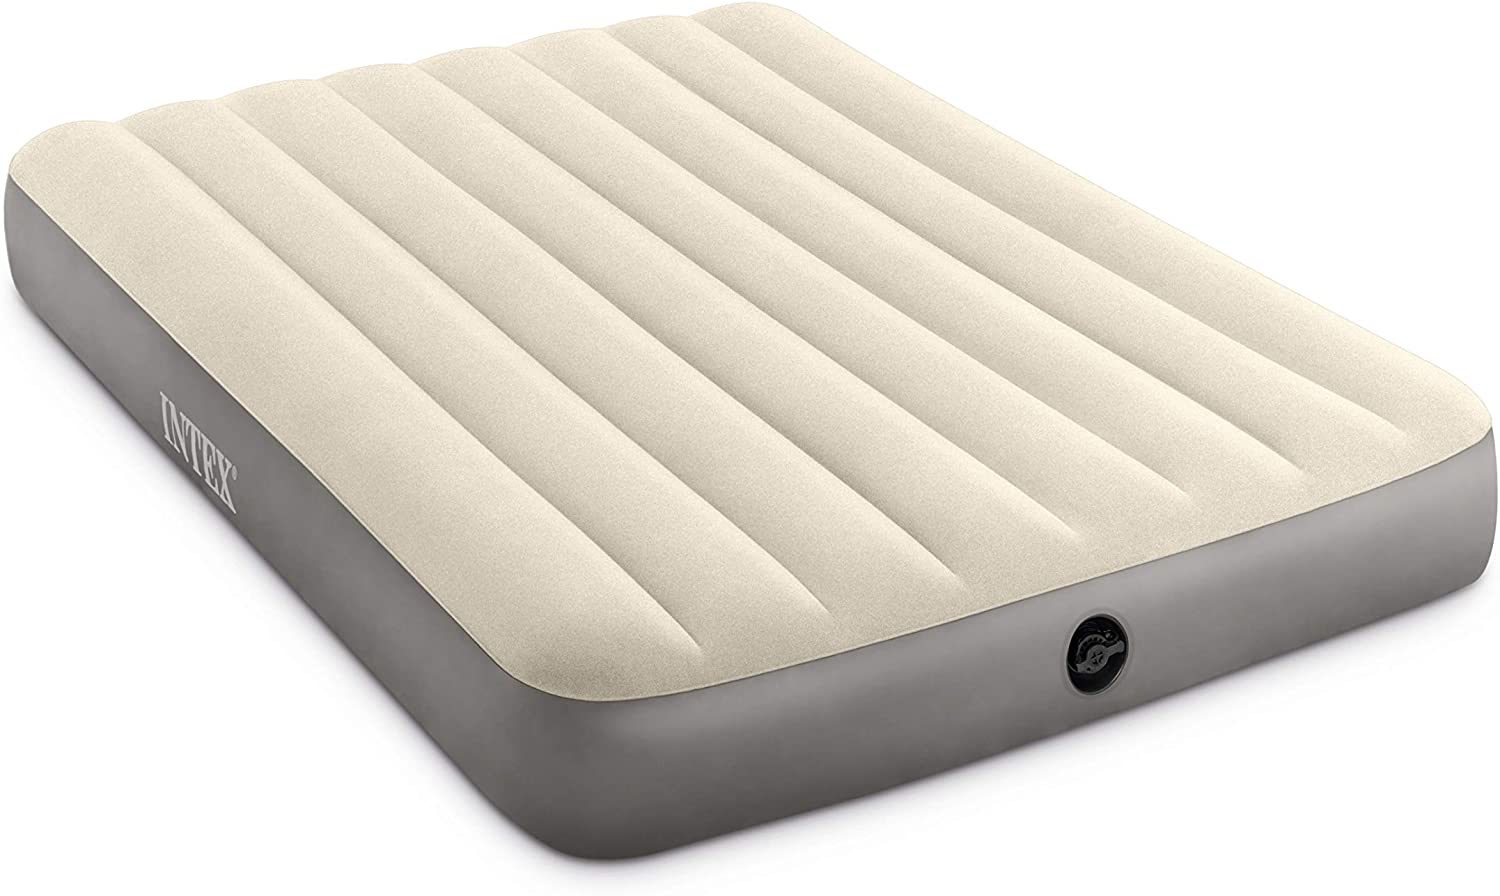 Air bed costs are lower when they don’t have special features, like this full size air bed that doesn’t have a built-in pump.